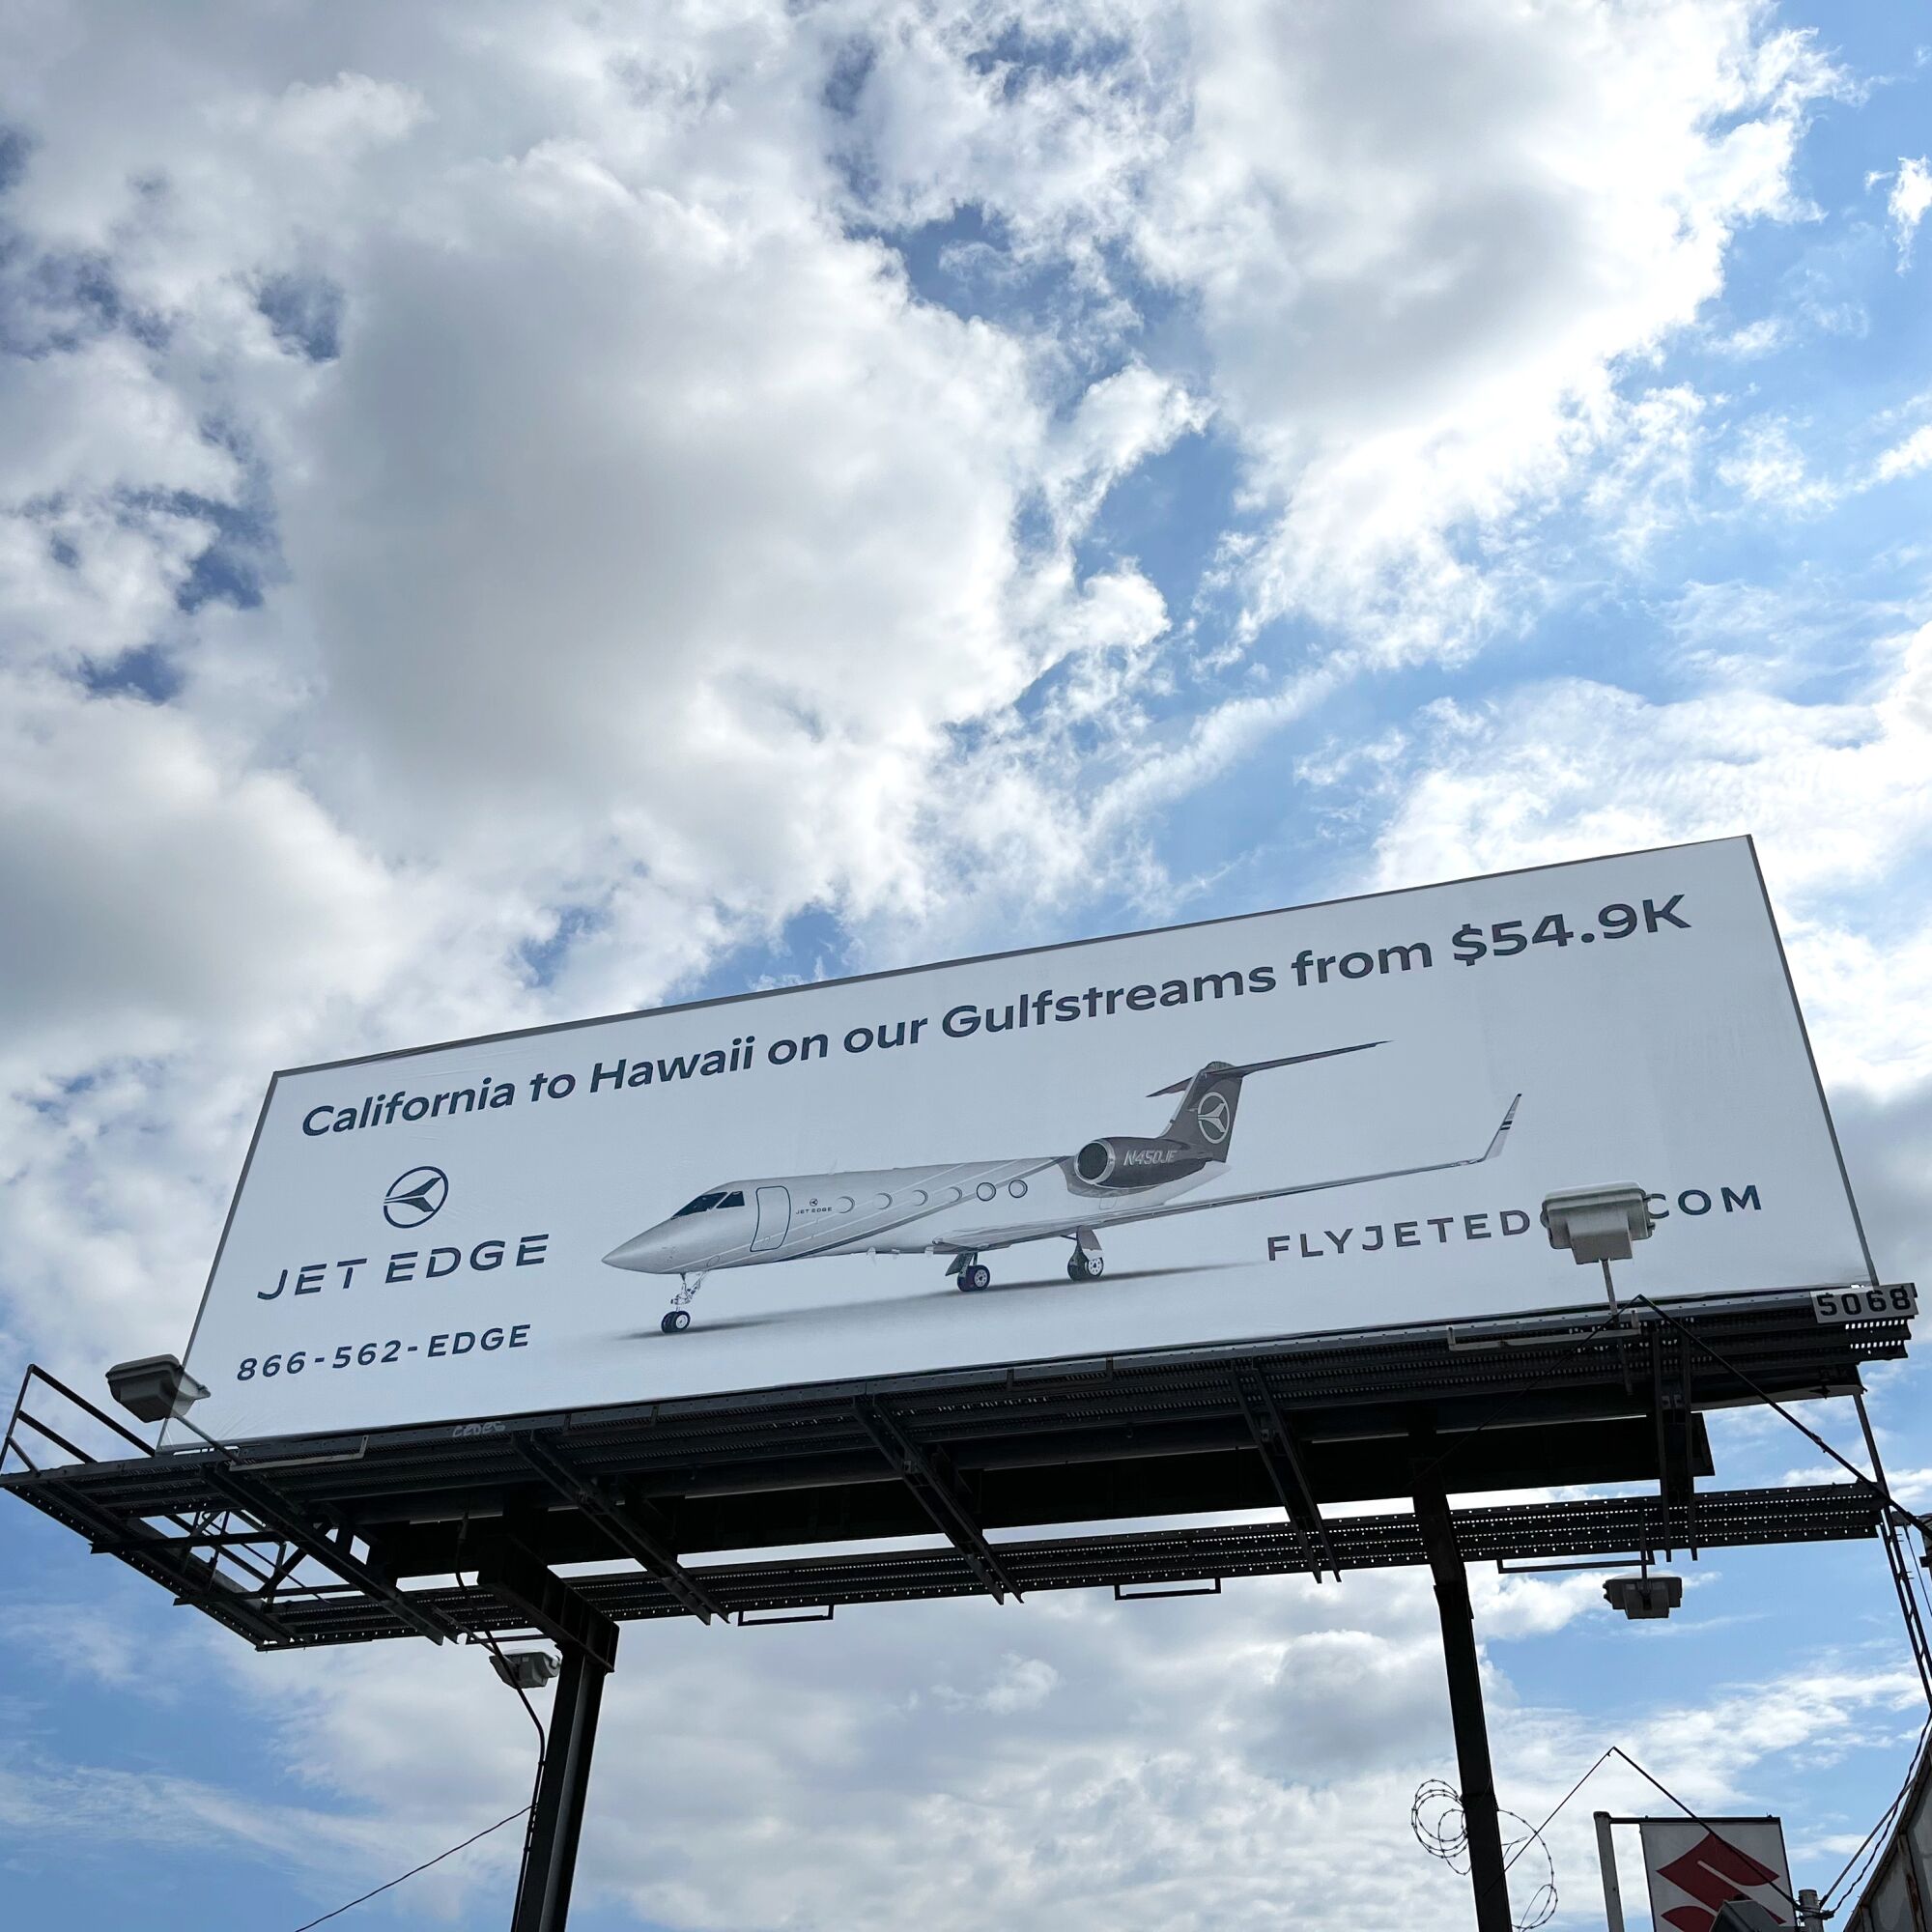 A billboard for Jet Edge advertises a private jet charter on Gulfstream to Hawaii for $54,900.